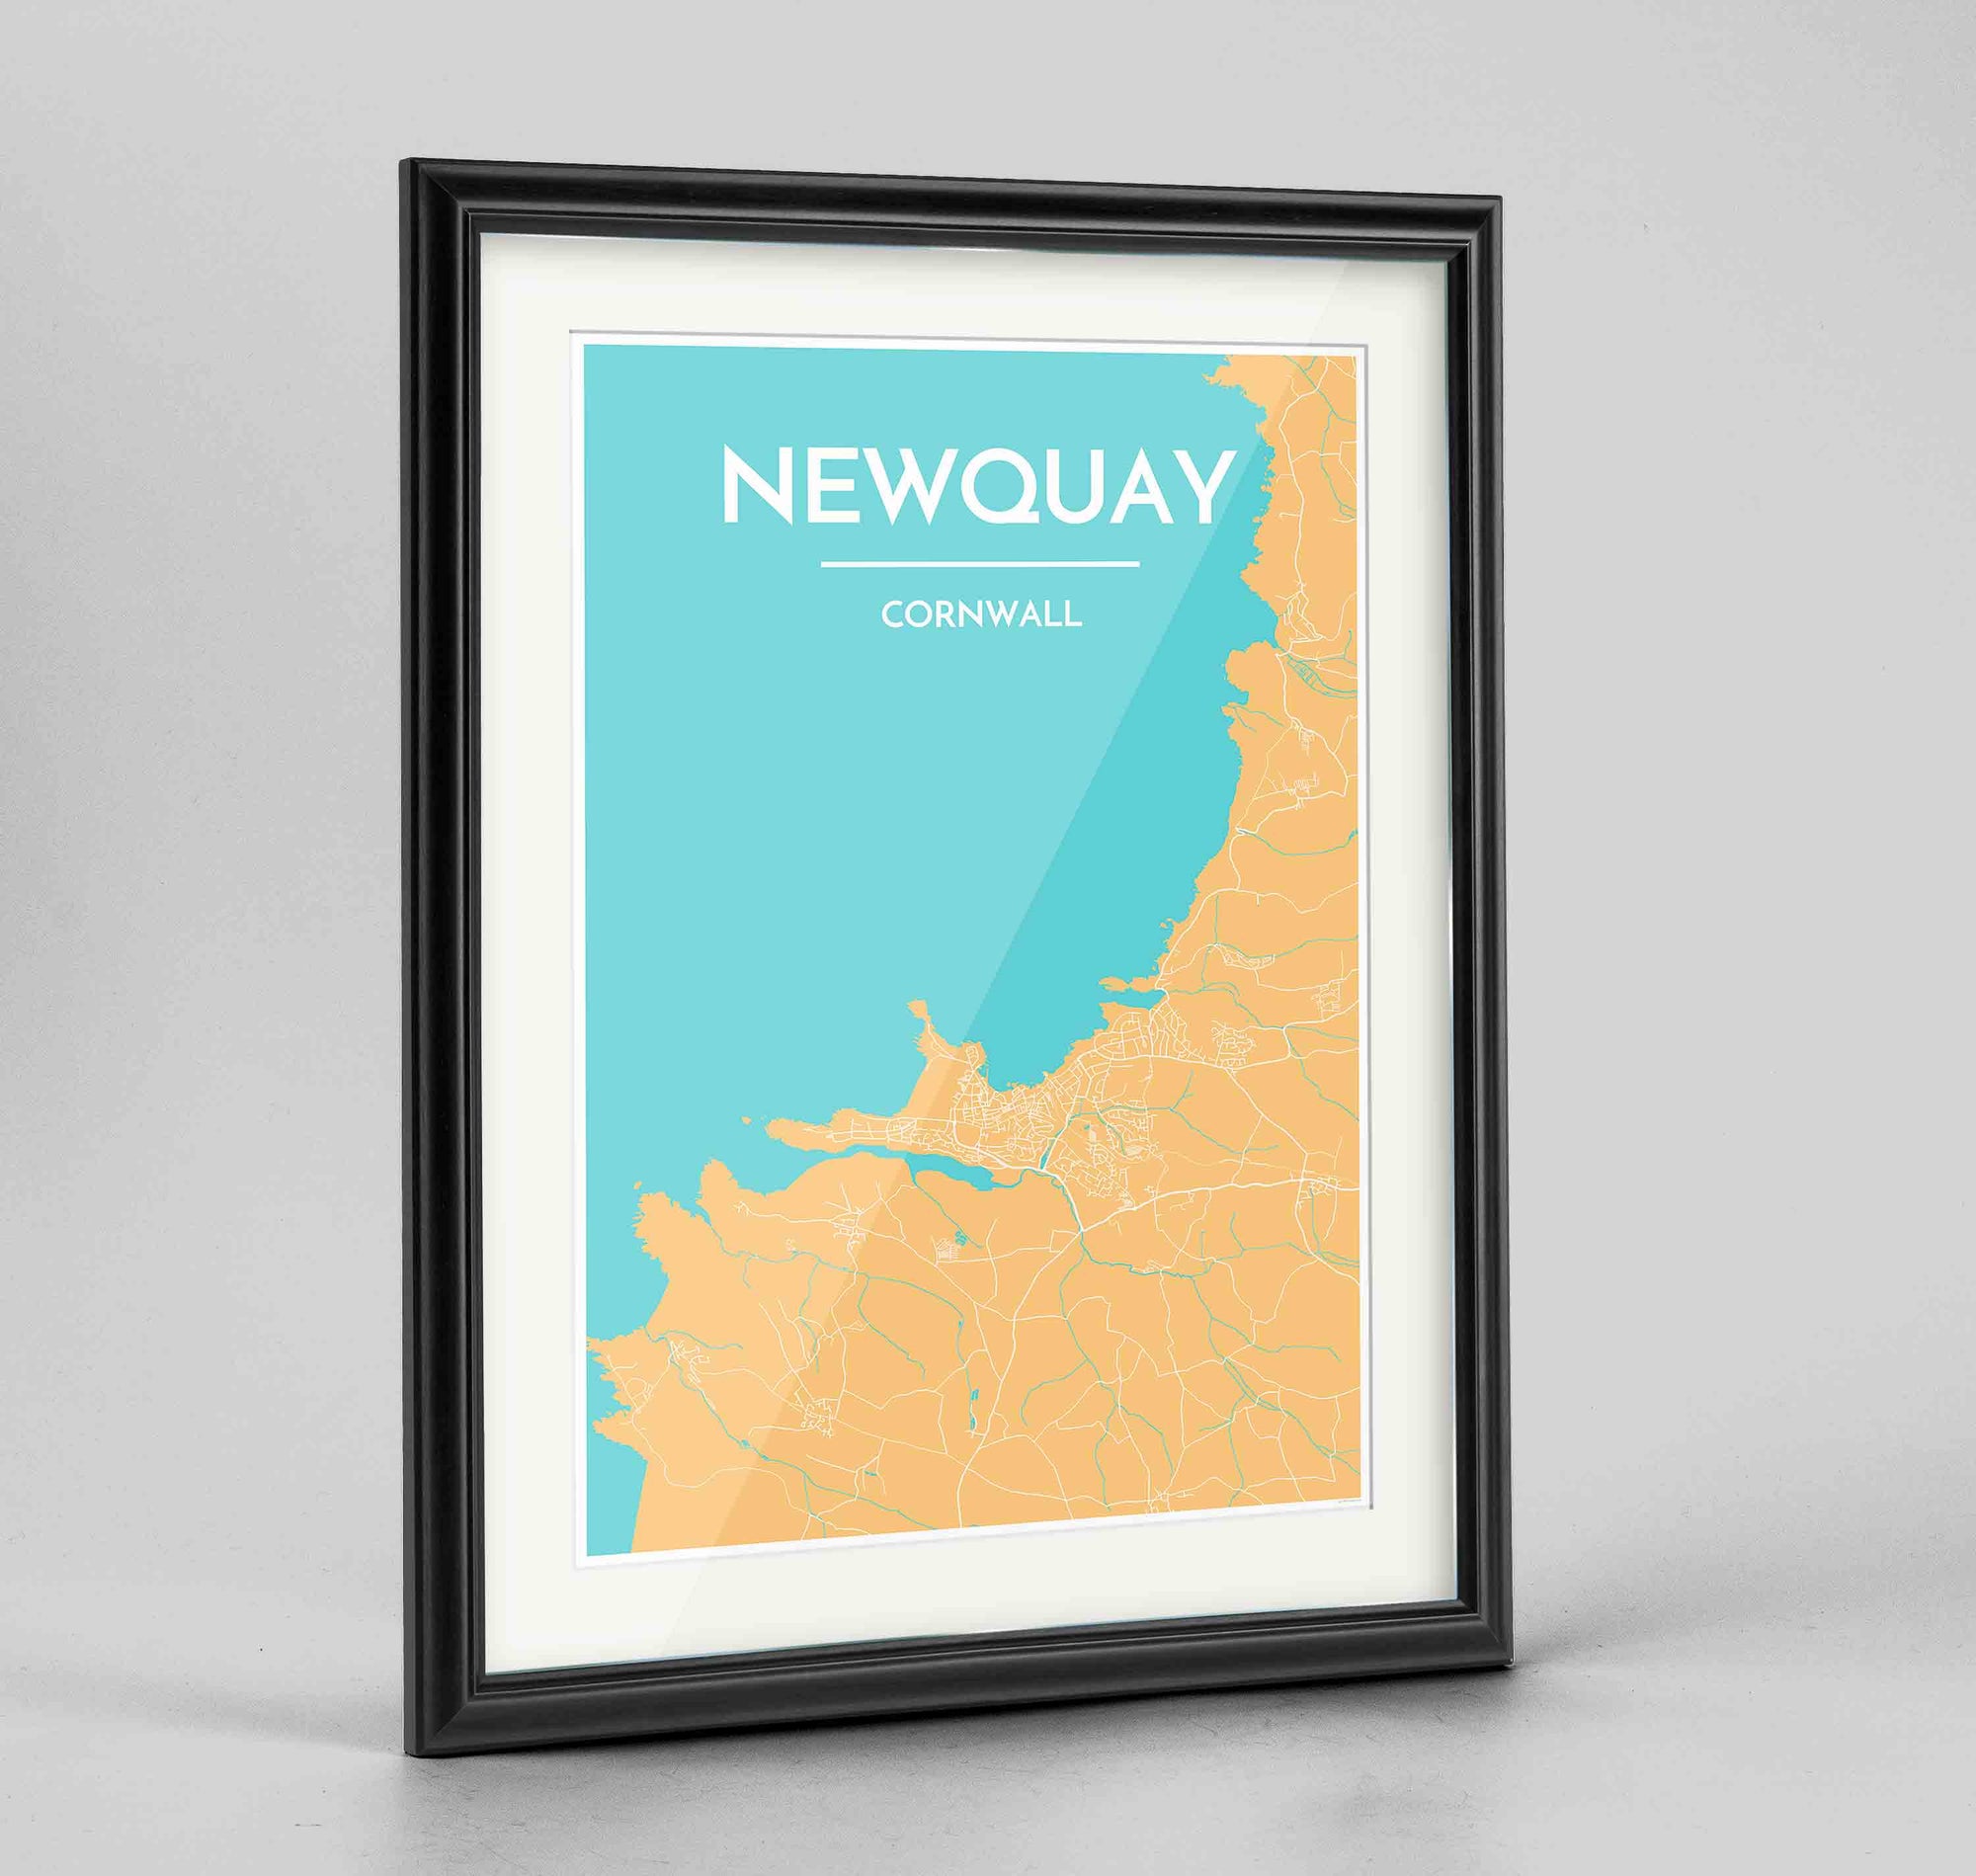 Framed Newquay Map Art Print 24x36" Traditional Black frame Point Two Design Group